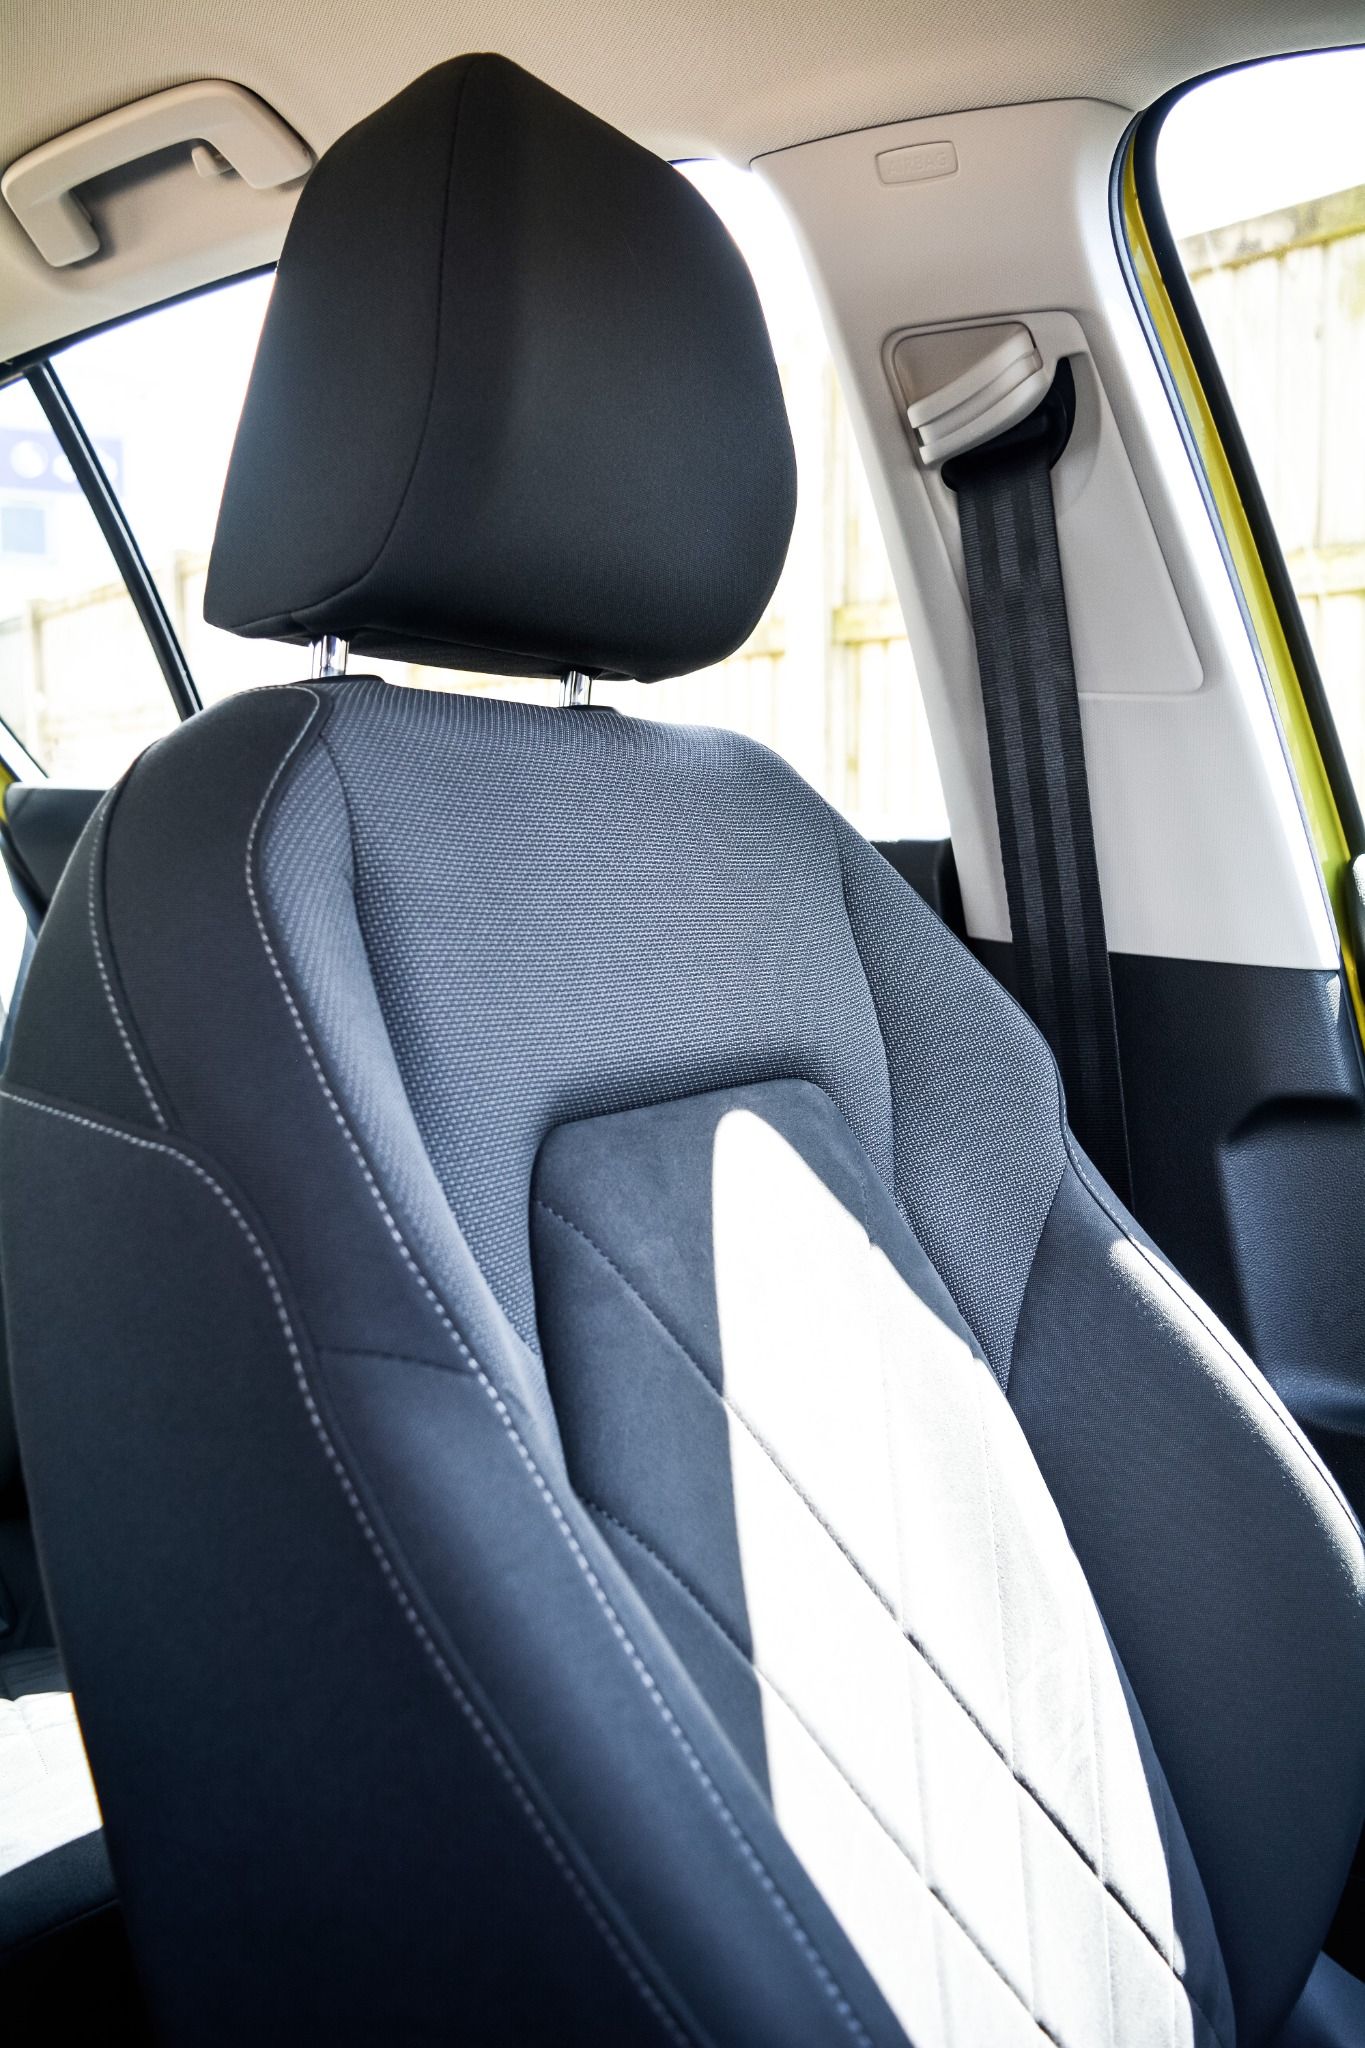 Close up image of upholstery on Volkswagen Golf